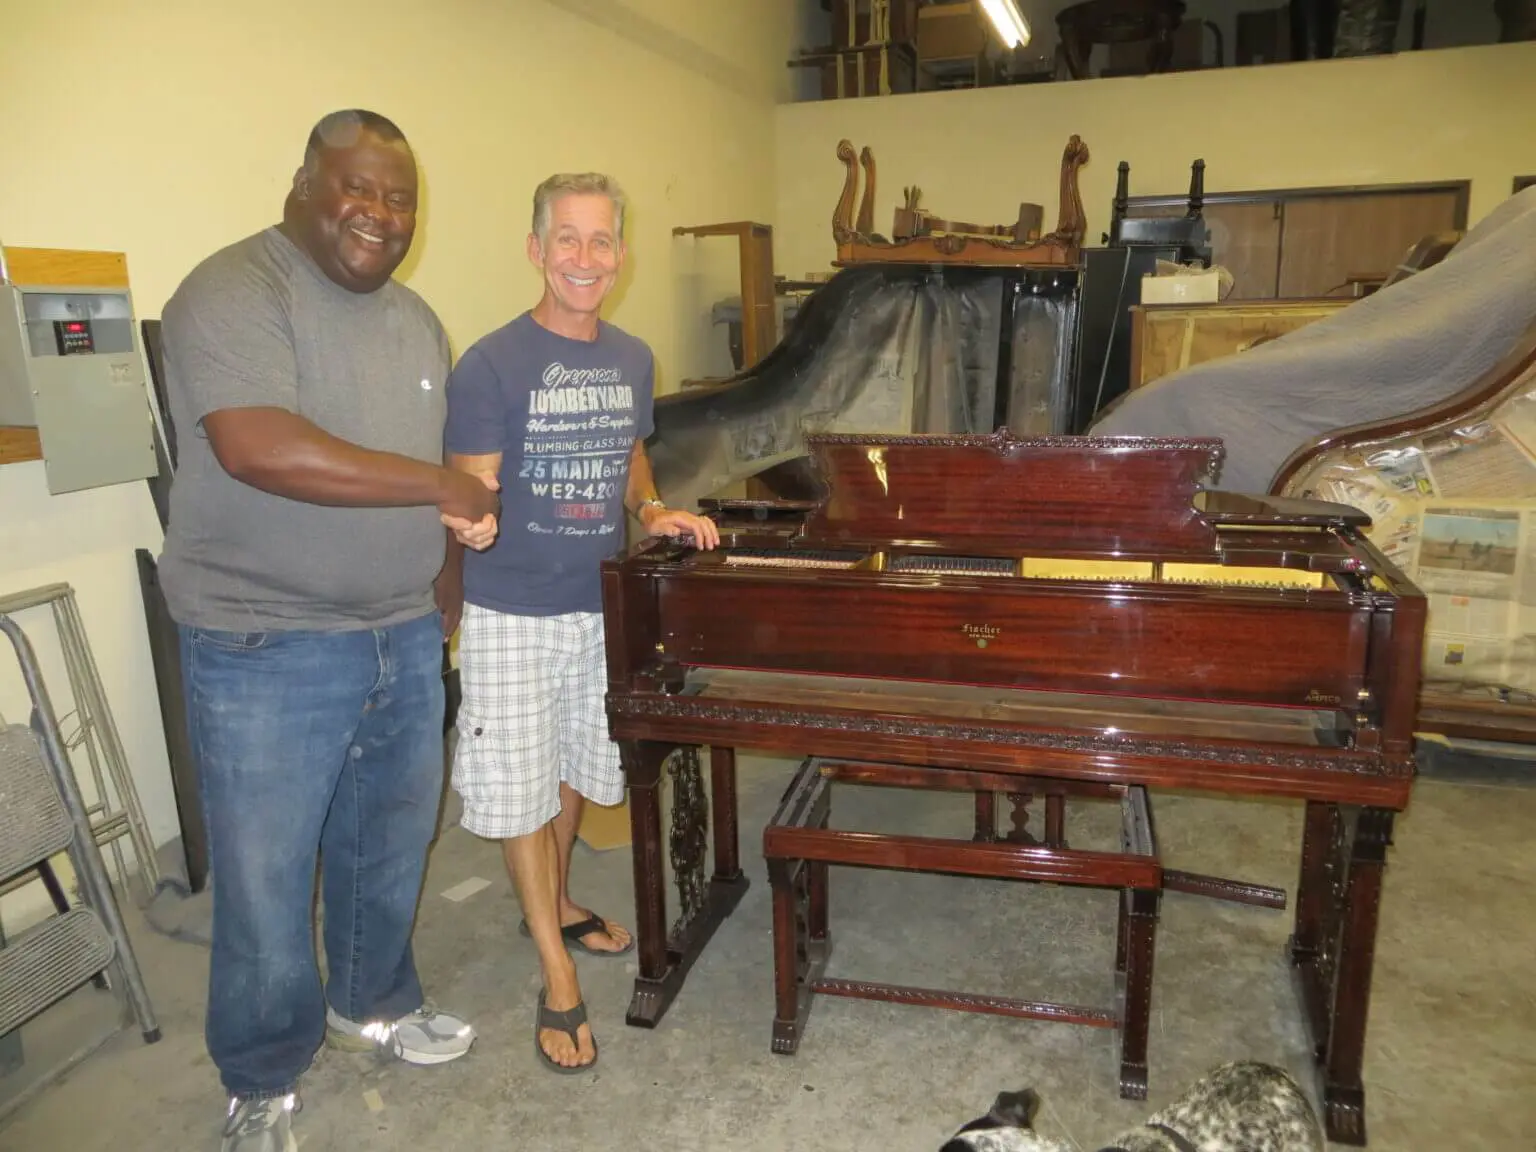 Two men standing next to a piano in a room.